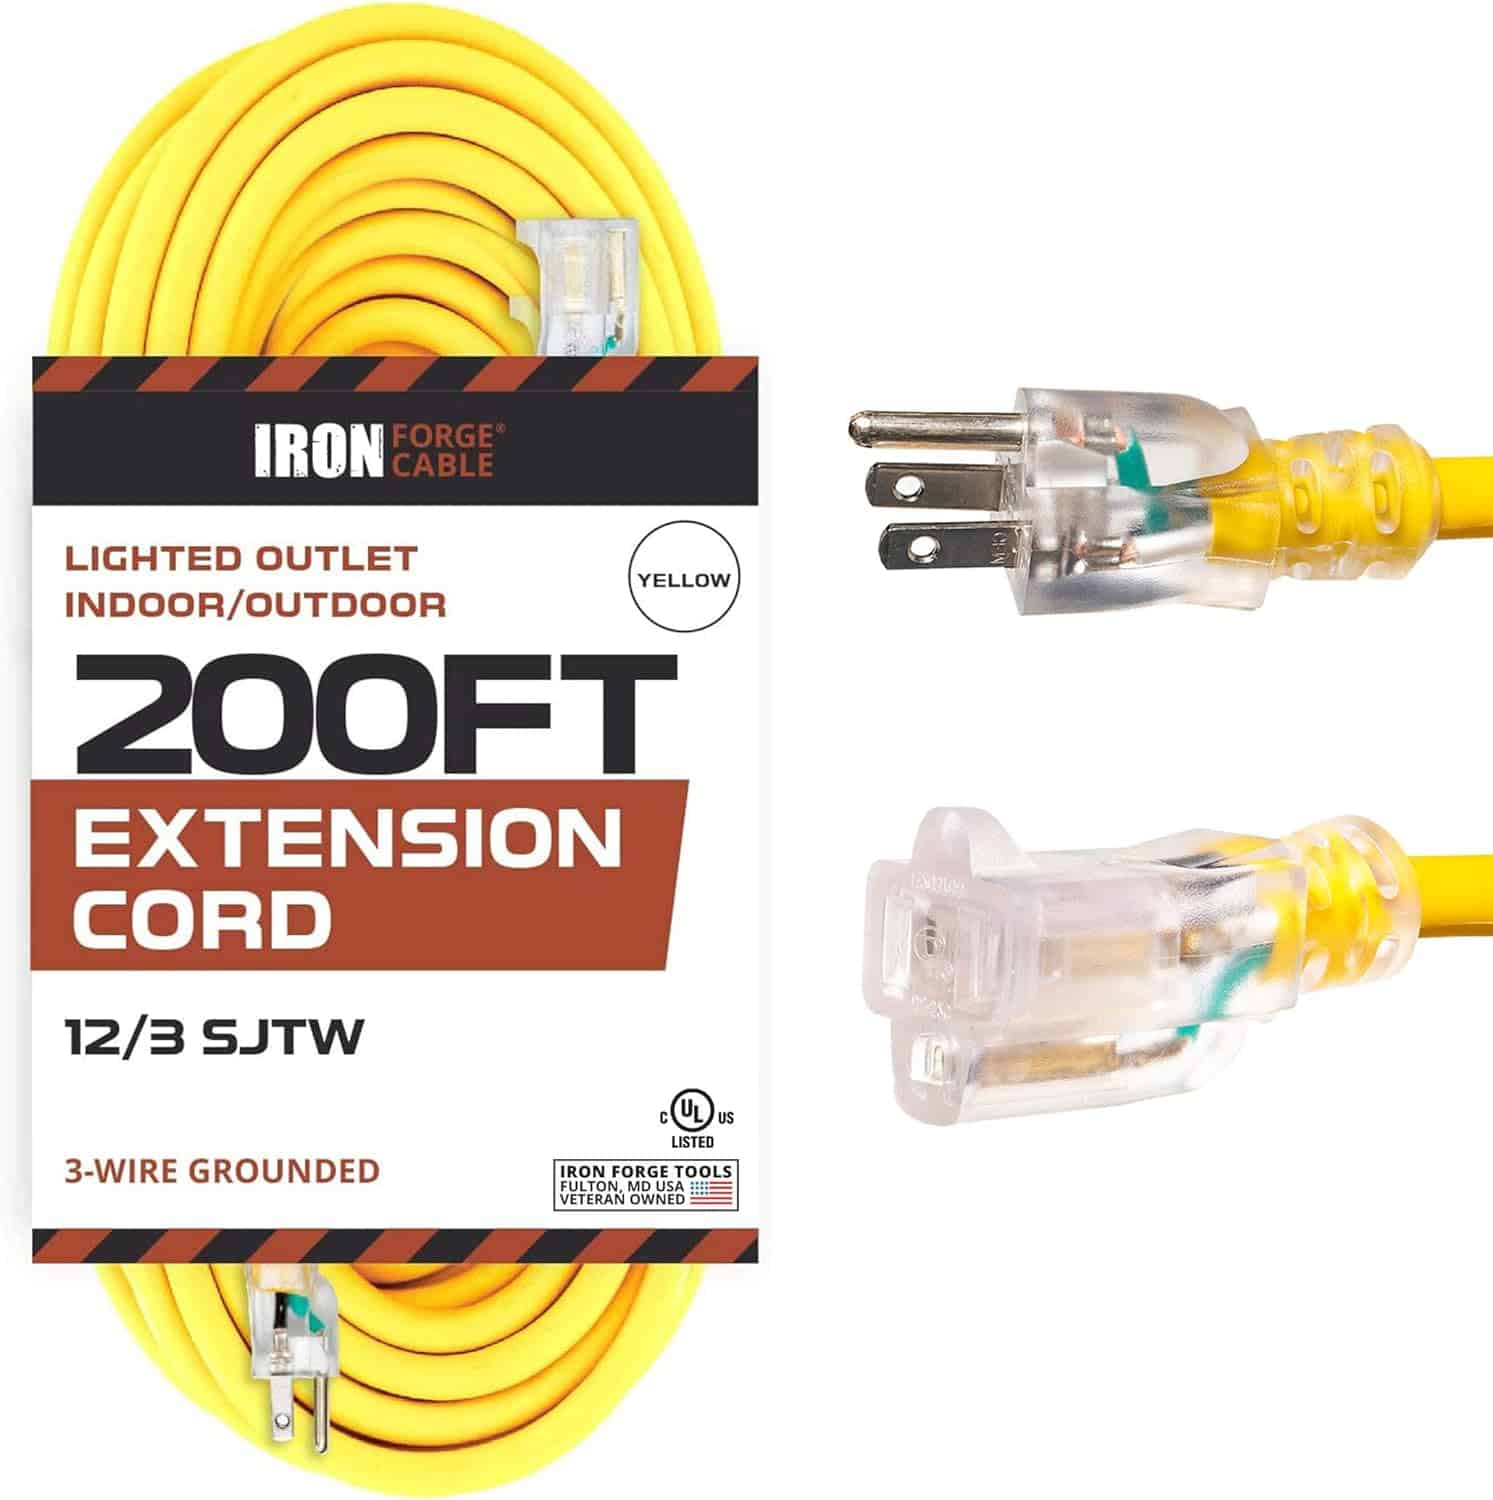 Iron-Forge-Heavy-Duty-Extension-Cord-200-ft-Extension-Cord-Outdoor-with-3-Prong-Lighted-End-12-Gauge-Extension-Cord-200-Construction-Grade-Great-for-Major-Appliances-Generator-US-Veteran-Owned